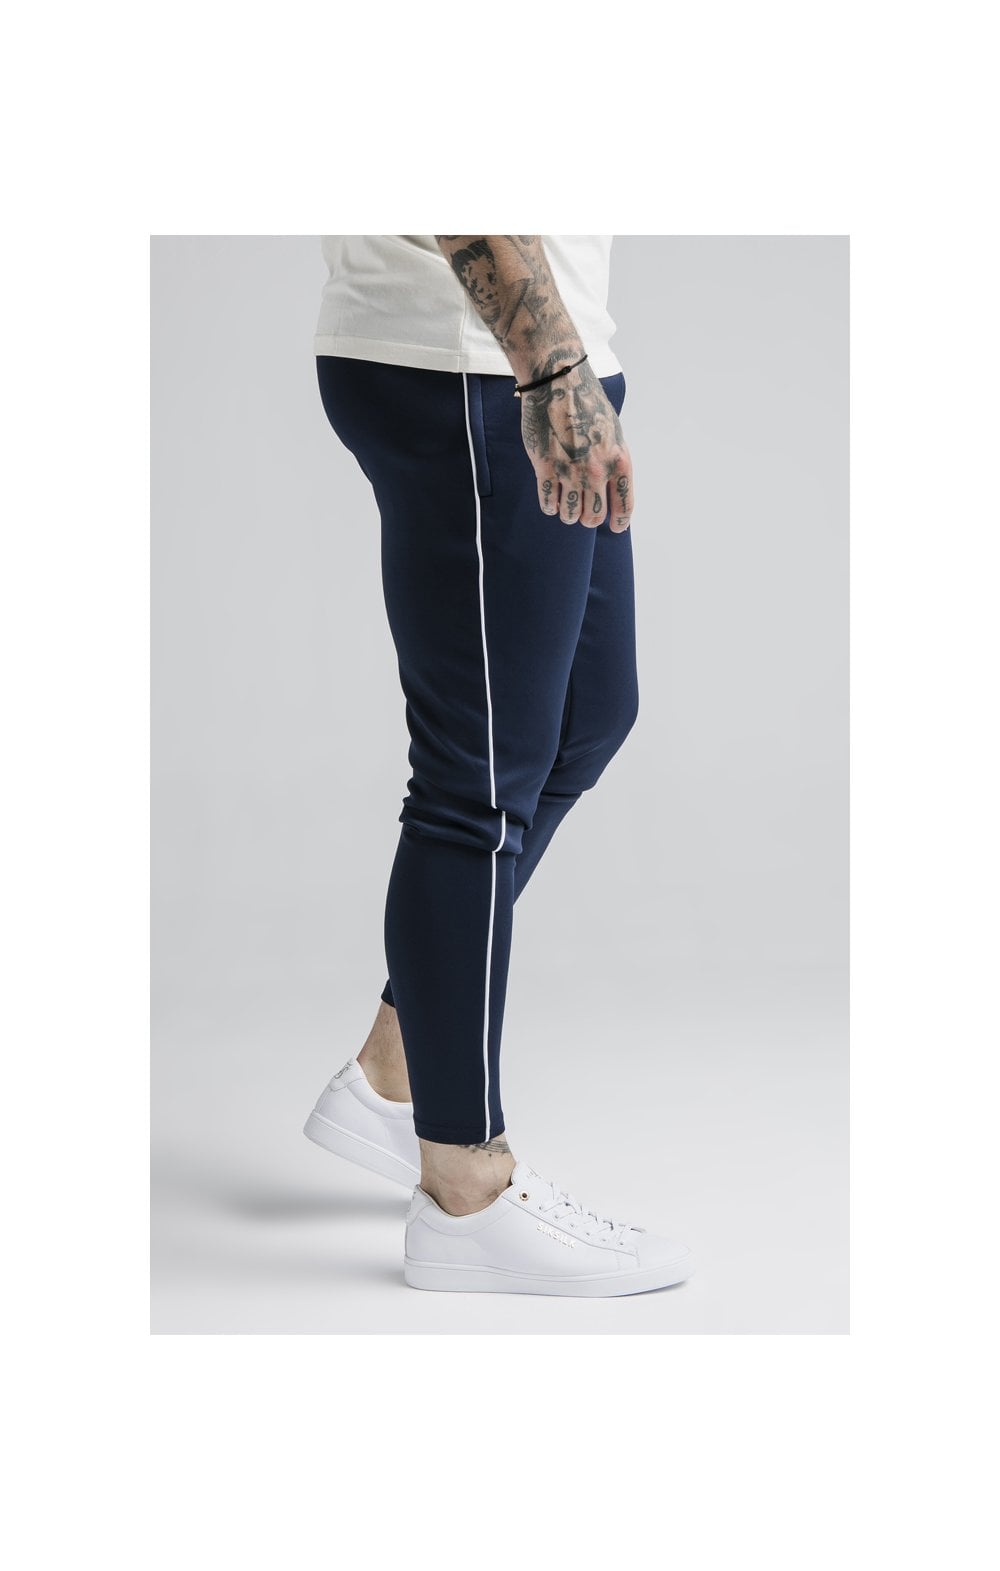 SikSilk Agility Deluxe Track Pants - Navy & Off White (1)